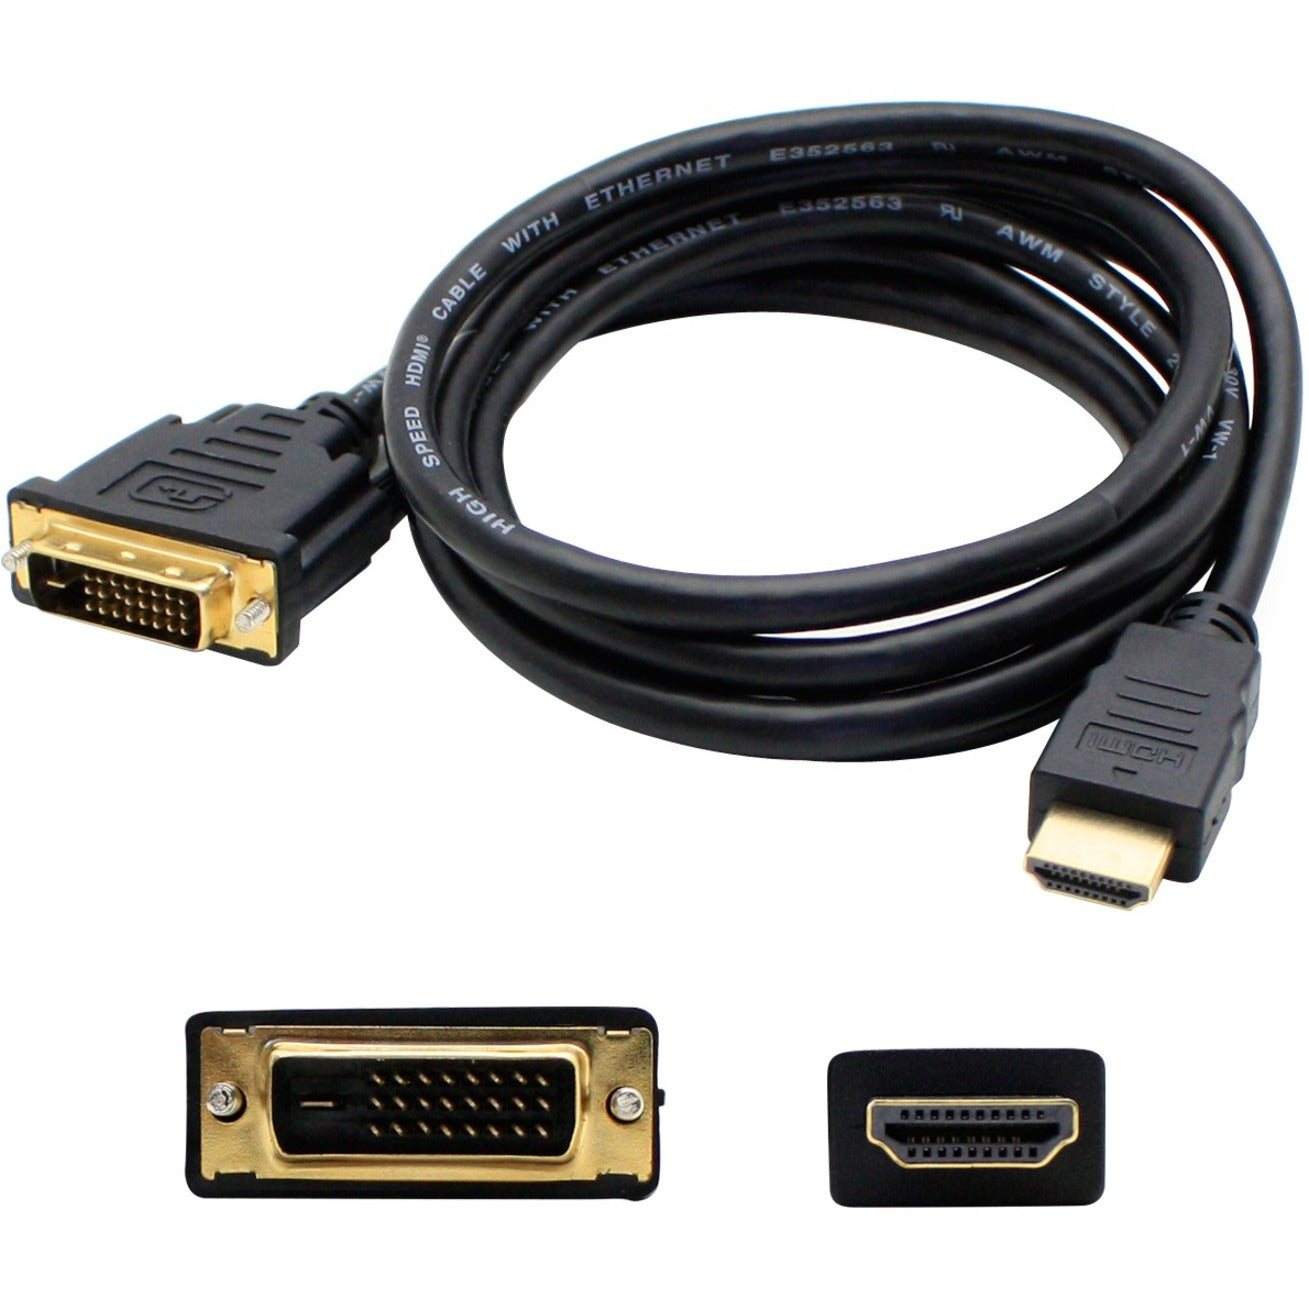 AddOn HDMI2DVIDS-5PK DVI/HDMI Video Cable, 6ft, Copper Conductor, 1920 x 1200 Supported Resolution